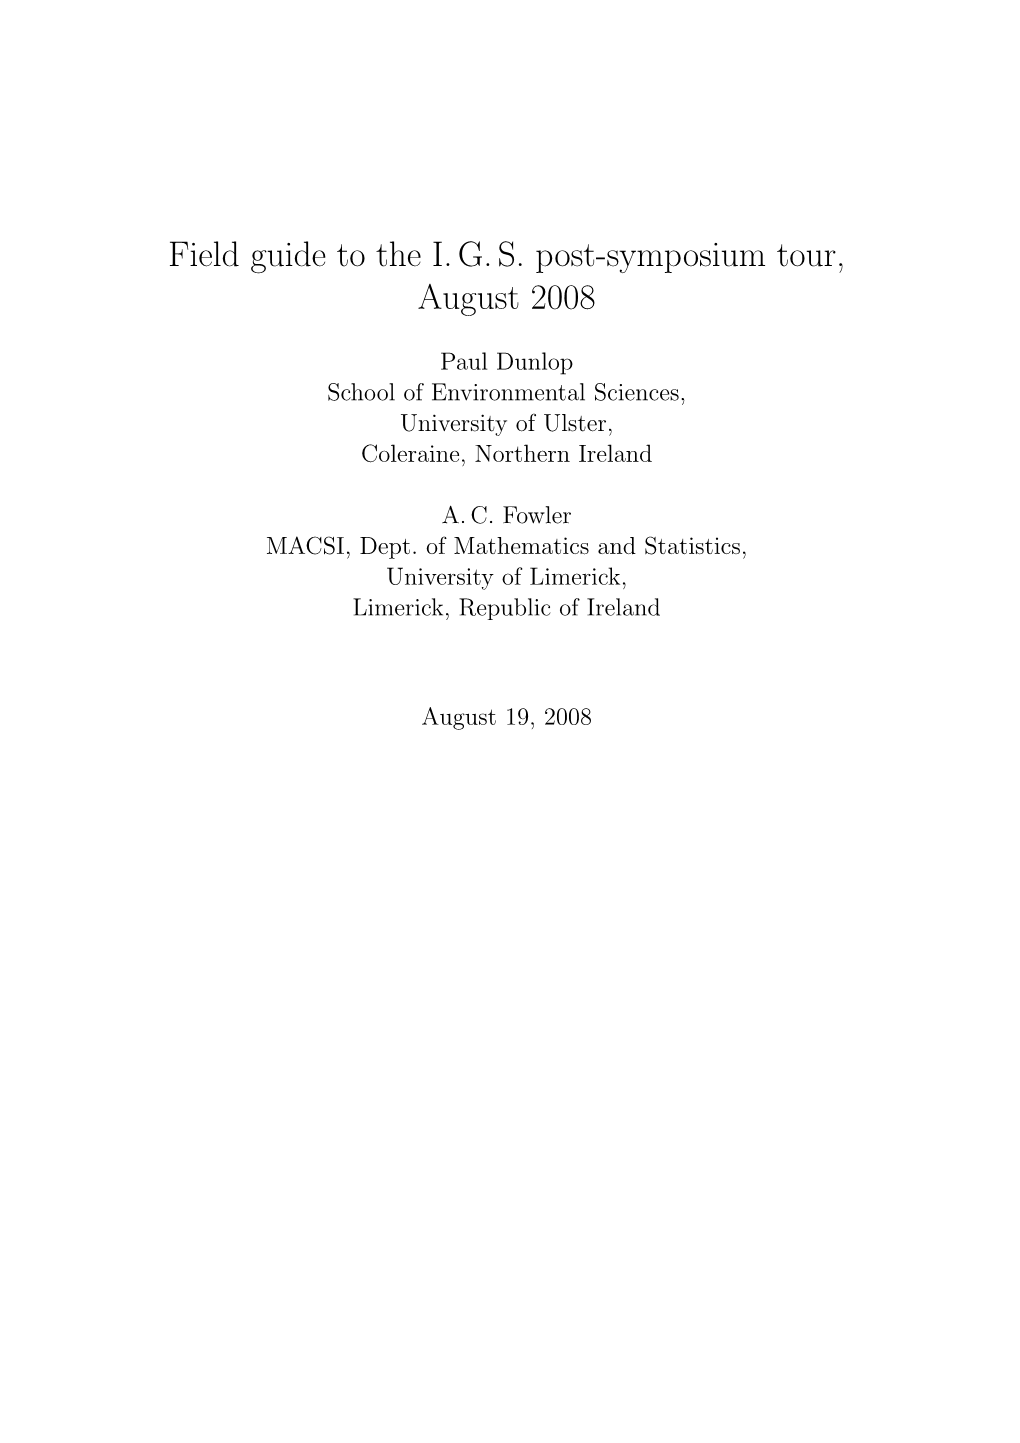 Field Guide to the I. G. S. Post-Symposium Tour, August 2008